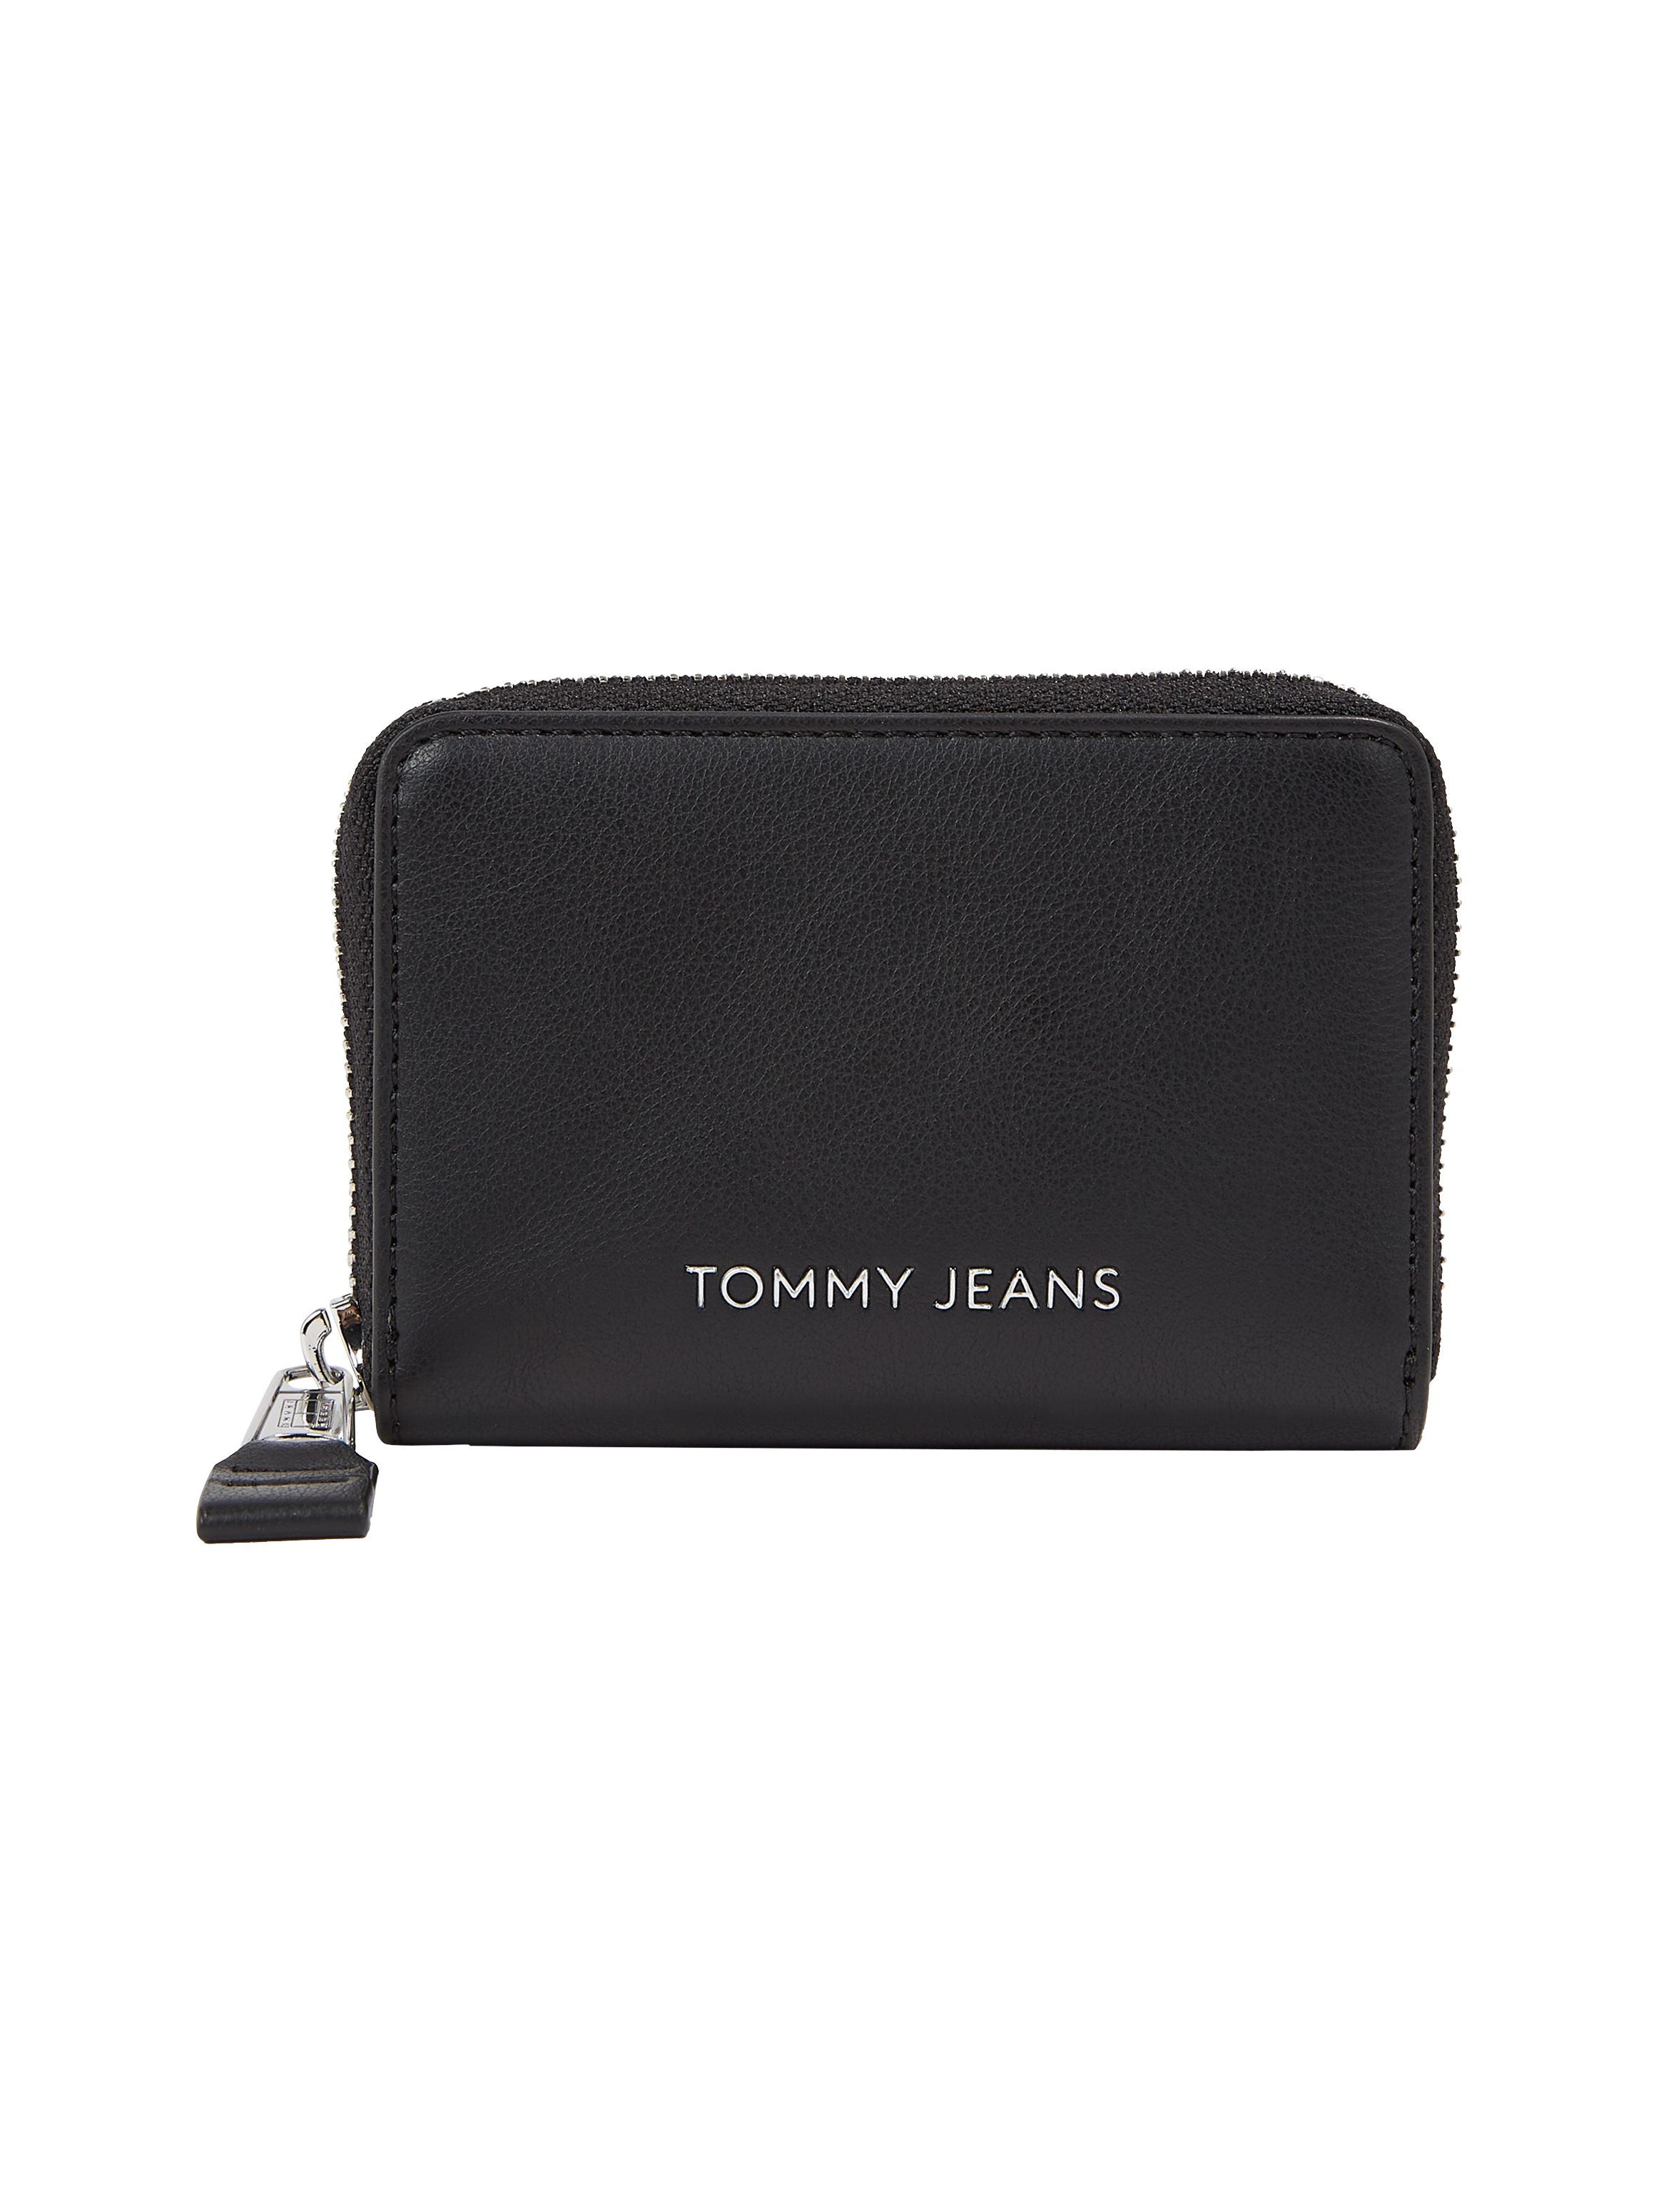 Tommy Jeans Metal Logo Small Zip Around Wallet